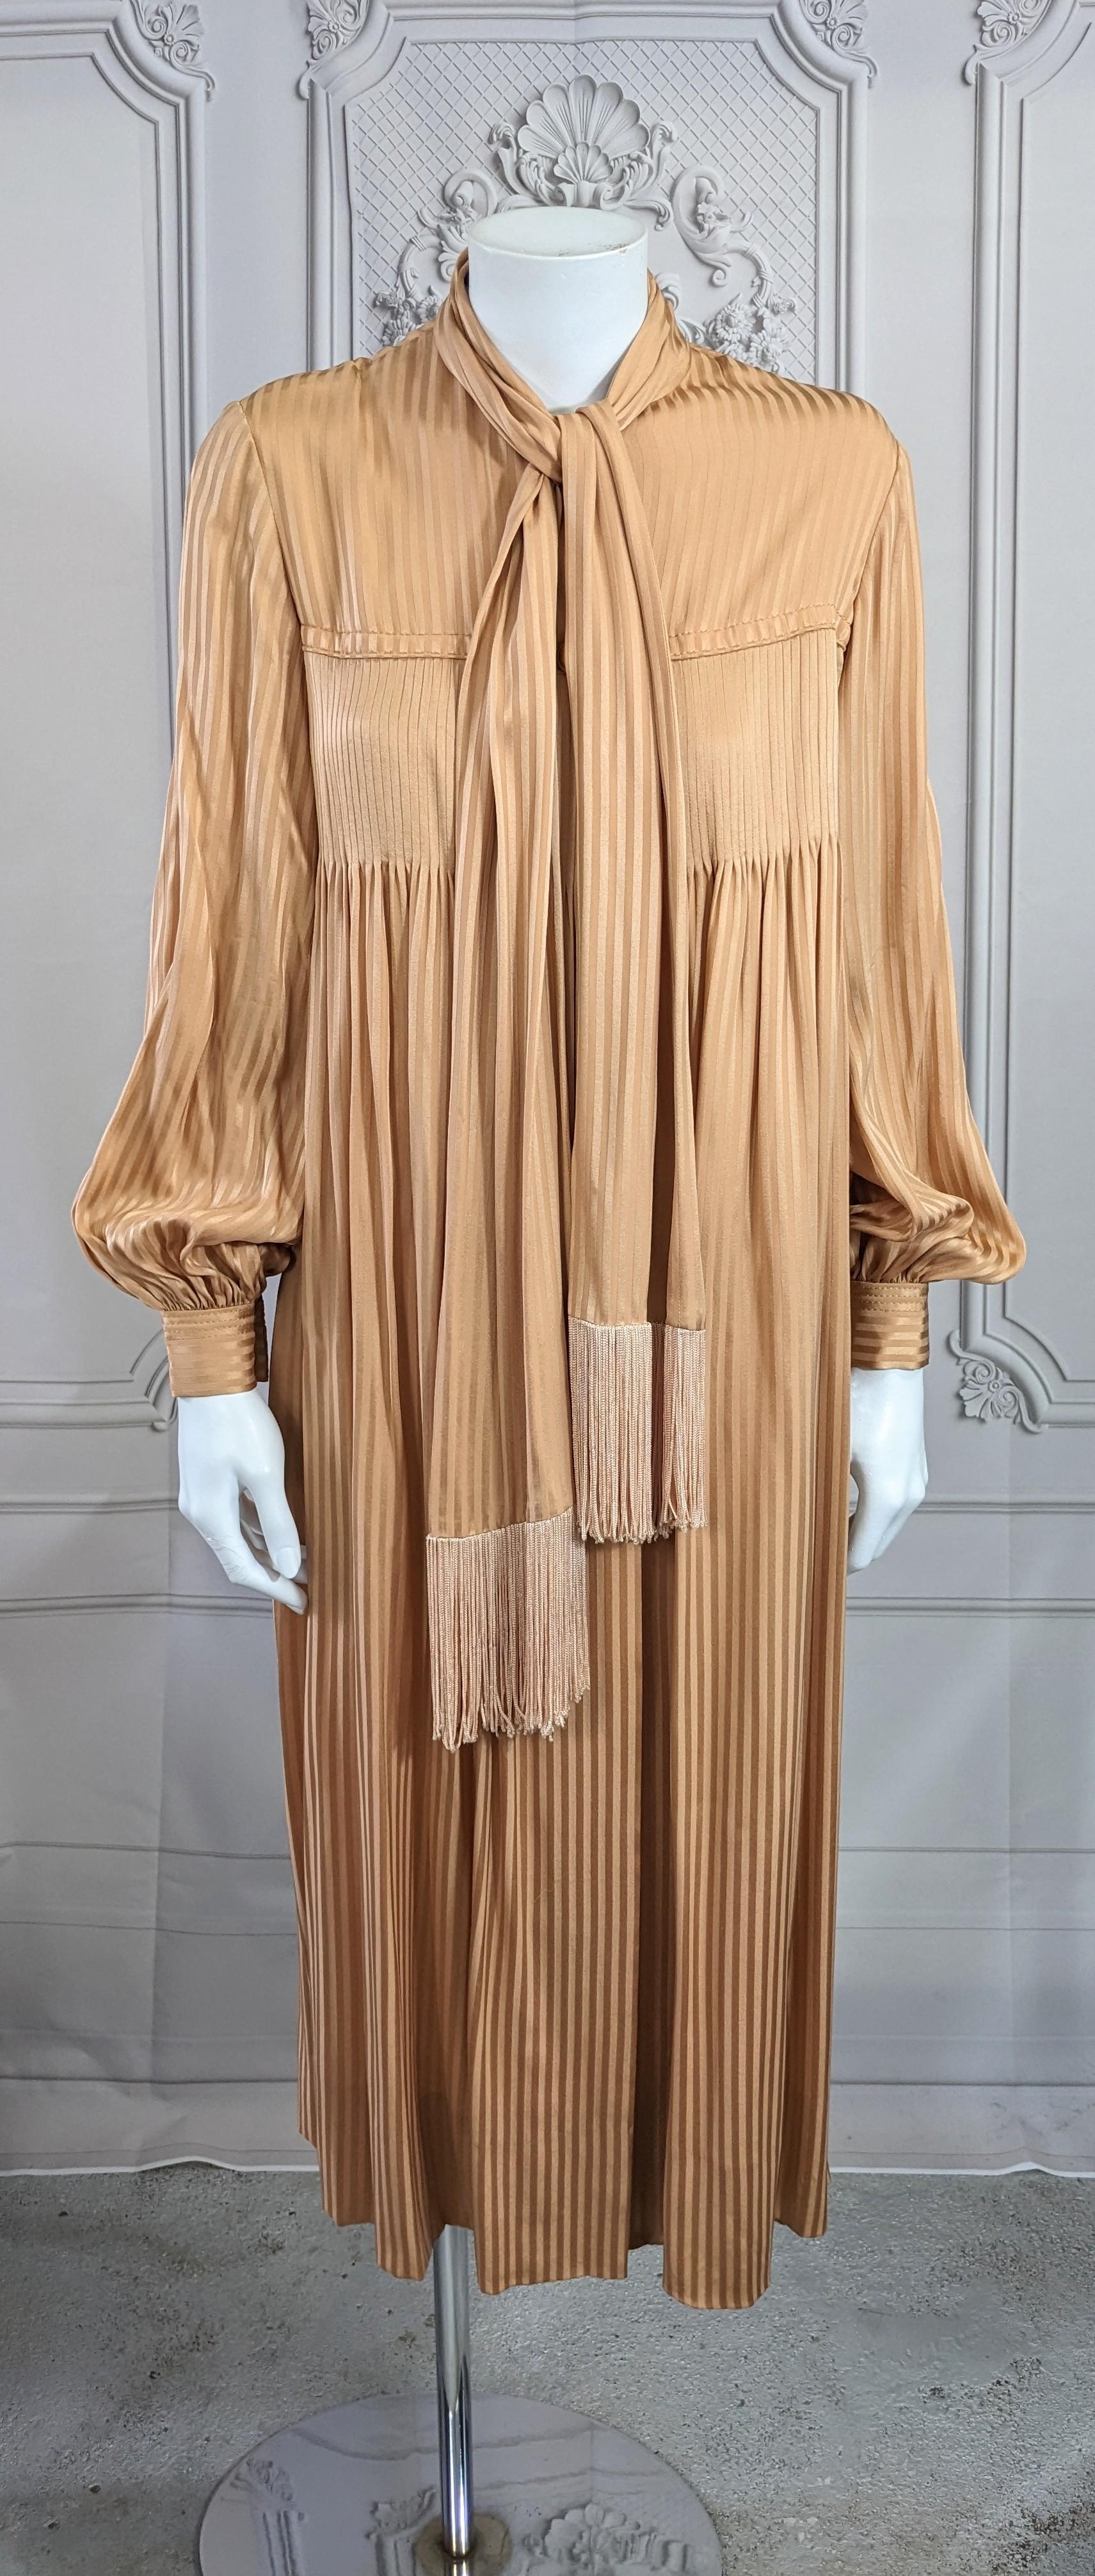 Galanos Silk Crepe Tucked Chemise with attached fringed scarf. Dozens of tiny pleats are stitched at bust and release into fullness below. Covered buttons down front with full sleeves. The exposed buttons are wood. Label missing. Lined in silk